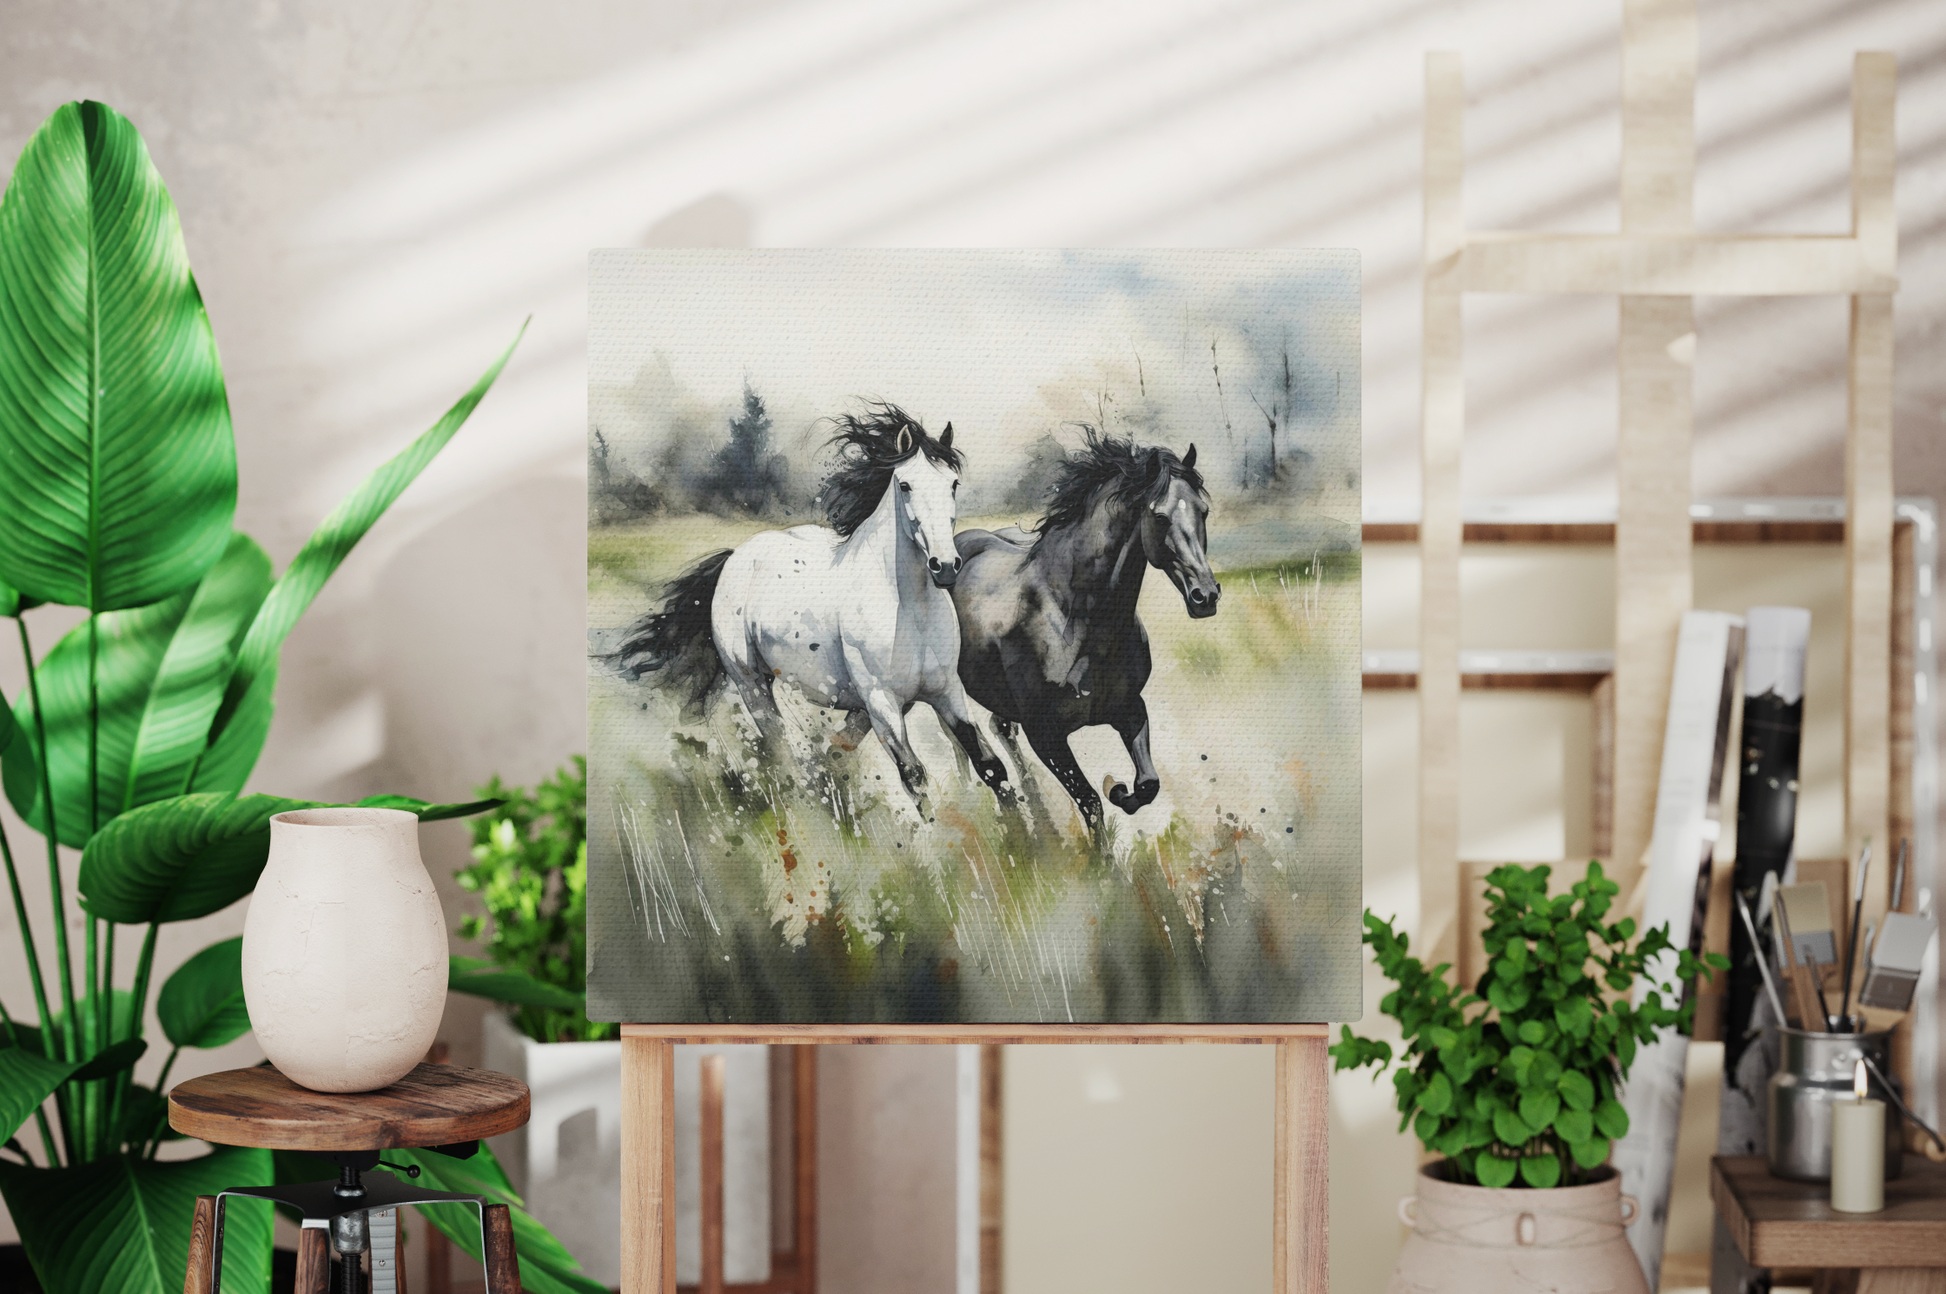 wild horse canvas wall art, canvas with stallions on it, wild horse canvas wall decor, horse wall art, western art prints, western horse canvas decor